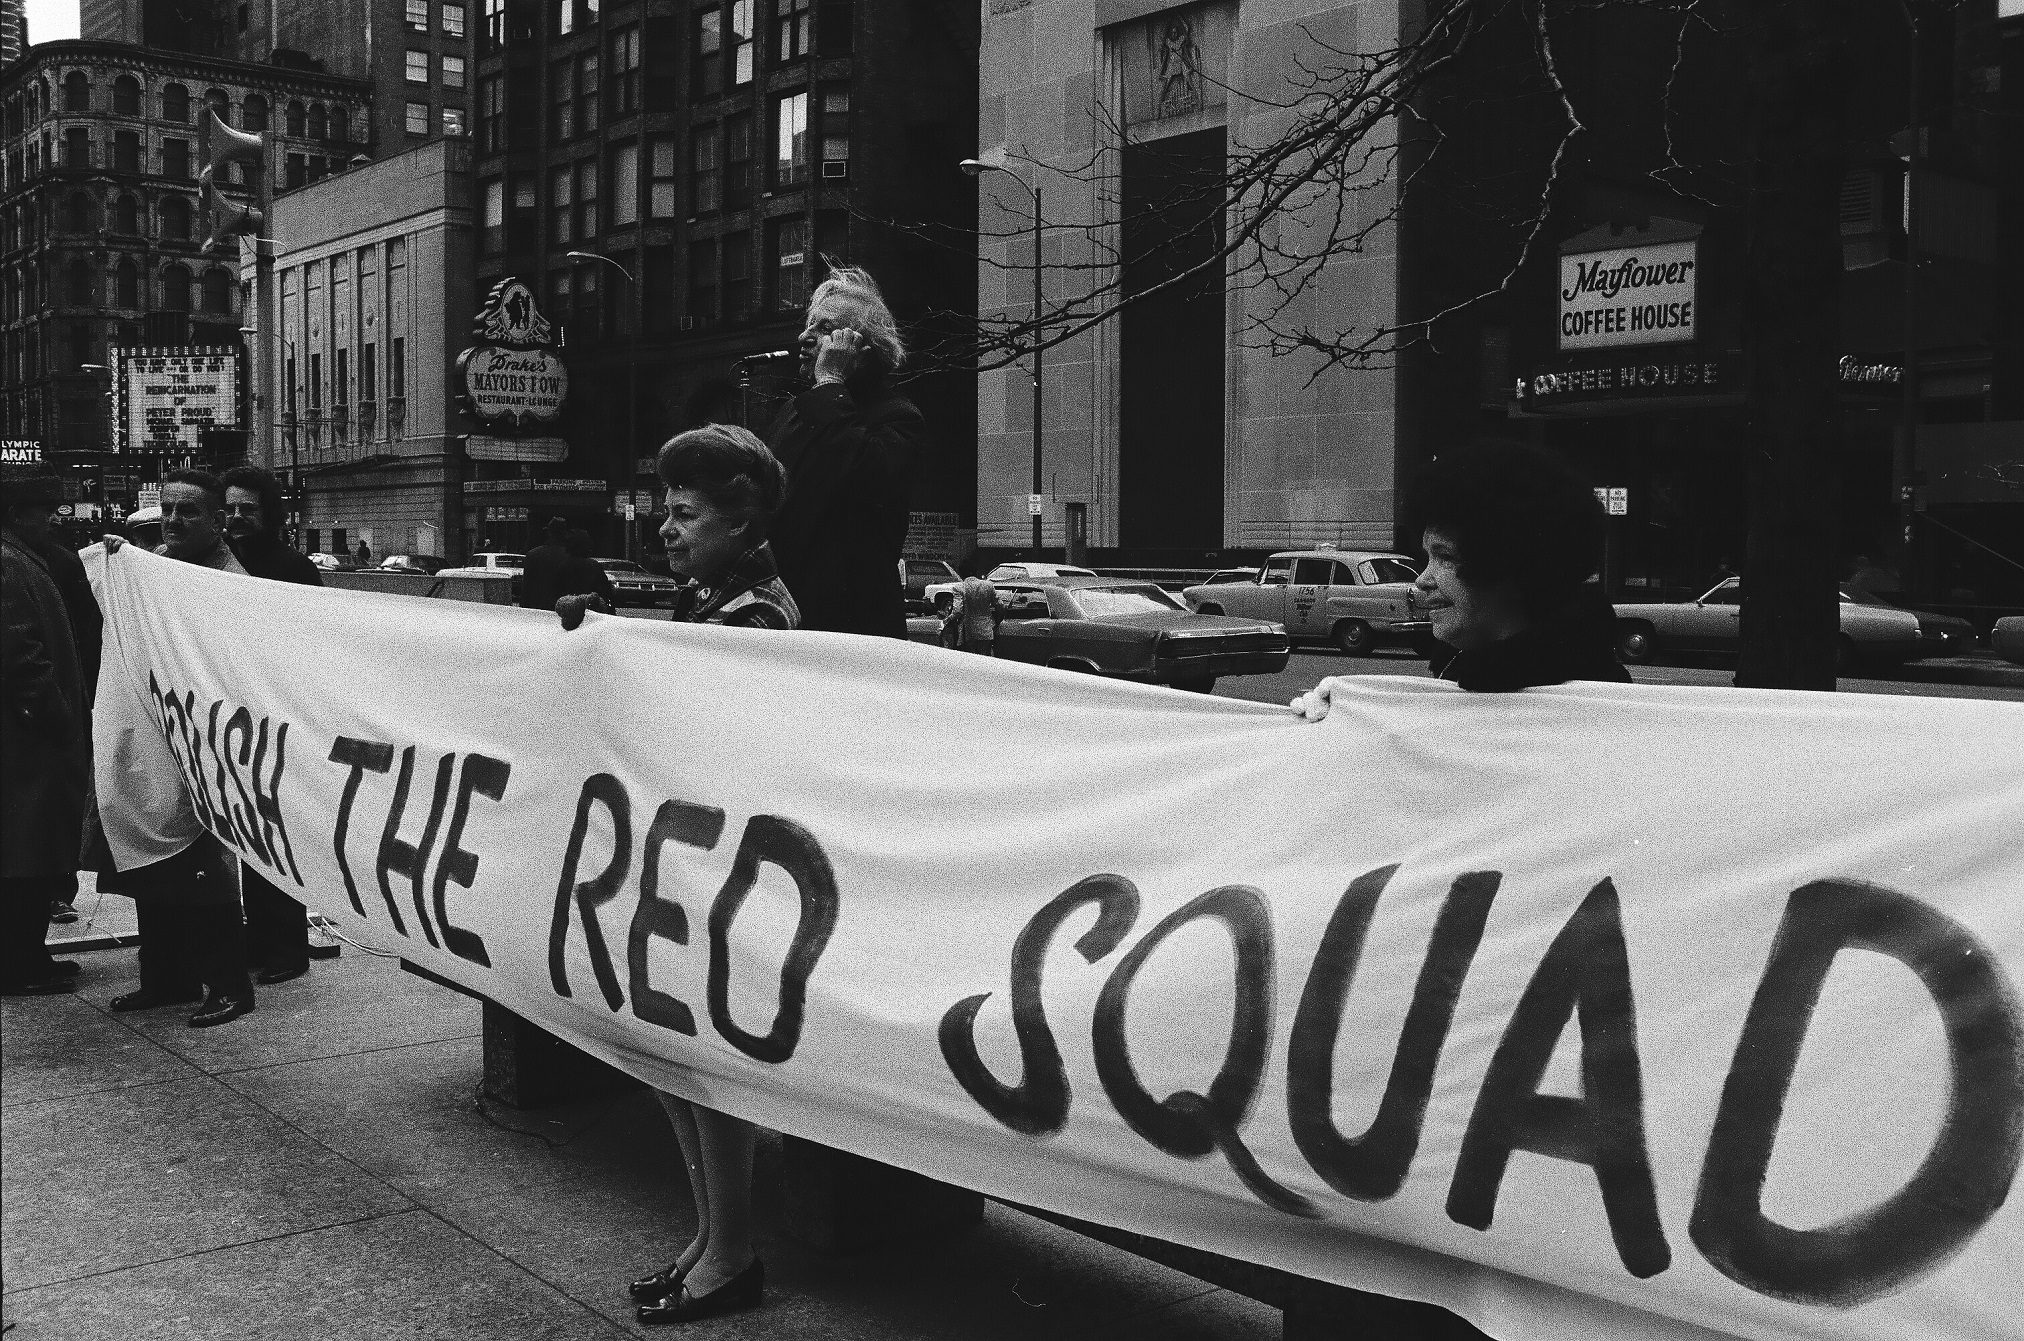 A group of protesters rally against the Red Squad, at the Civic Center (Richard J. Daley Center) 50 West Washington Street, Chicago, Illinois.